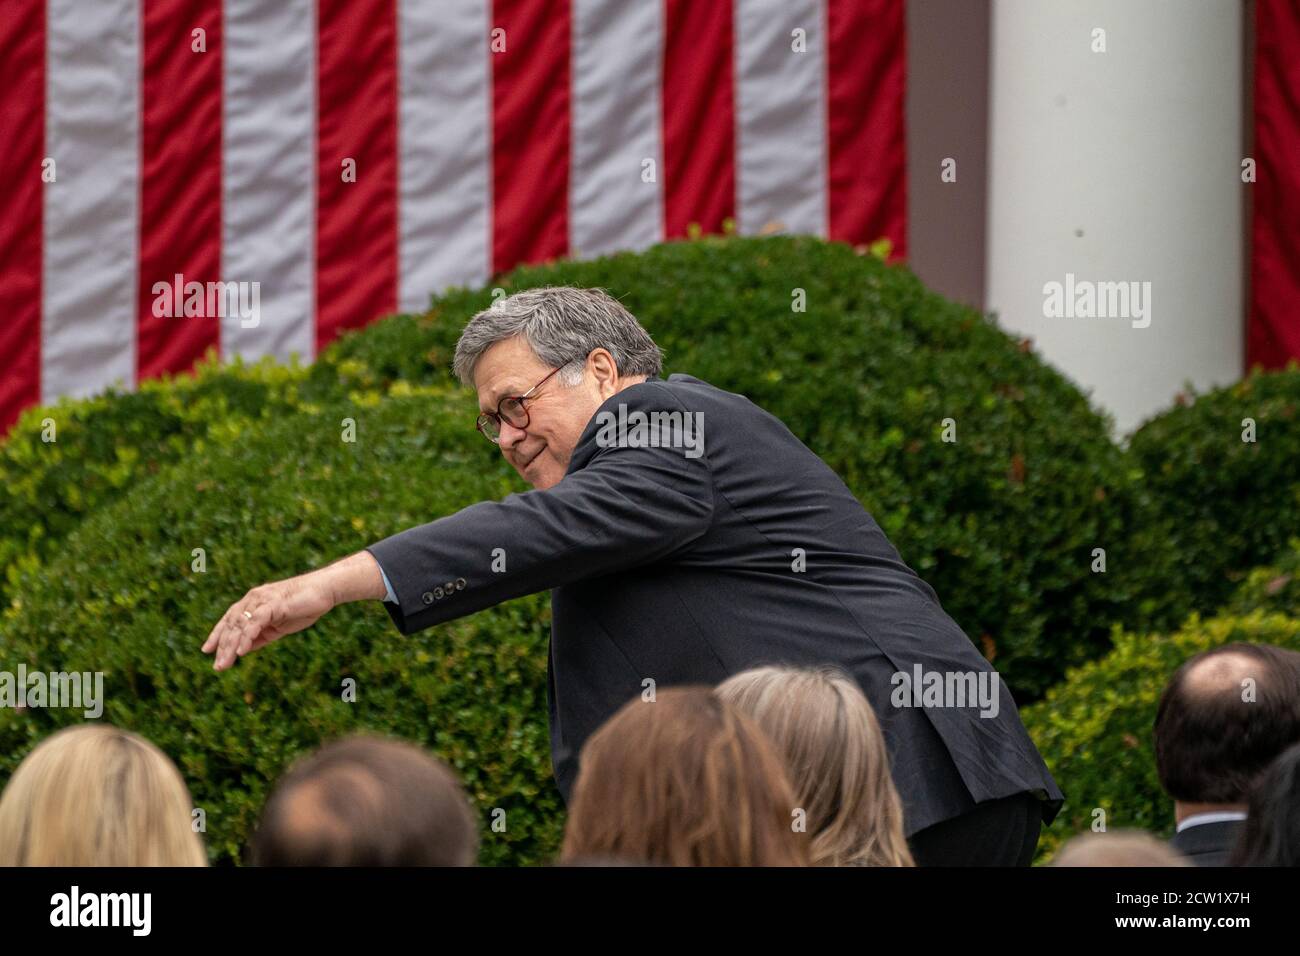 United States Attorney General William P. Barr is escorted in prior to President Donald Trump making an announcement in the Rose Garden to nominate Judge Amy Coney Barrett for the Supreme Court seat left vacant by Justice Ruth Bader Ginsburg's death last week Sep. 9/26/20, 2020 in Washington DC. The Republican-controlled Senate now has little time if they opt to confirm the nominee ahead of Election Day. (Photo by Photo Ken Cedeno/Sipa USA ) Credit: Sipa USA/Alamy Live News Stock Photo